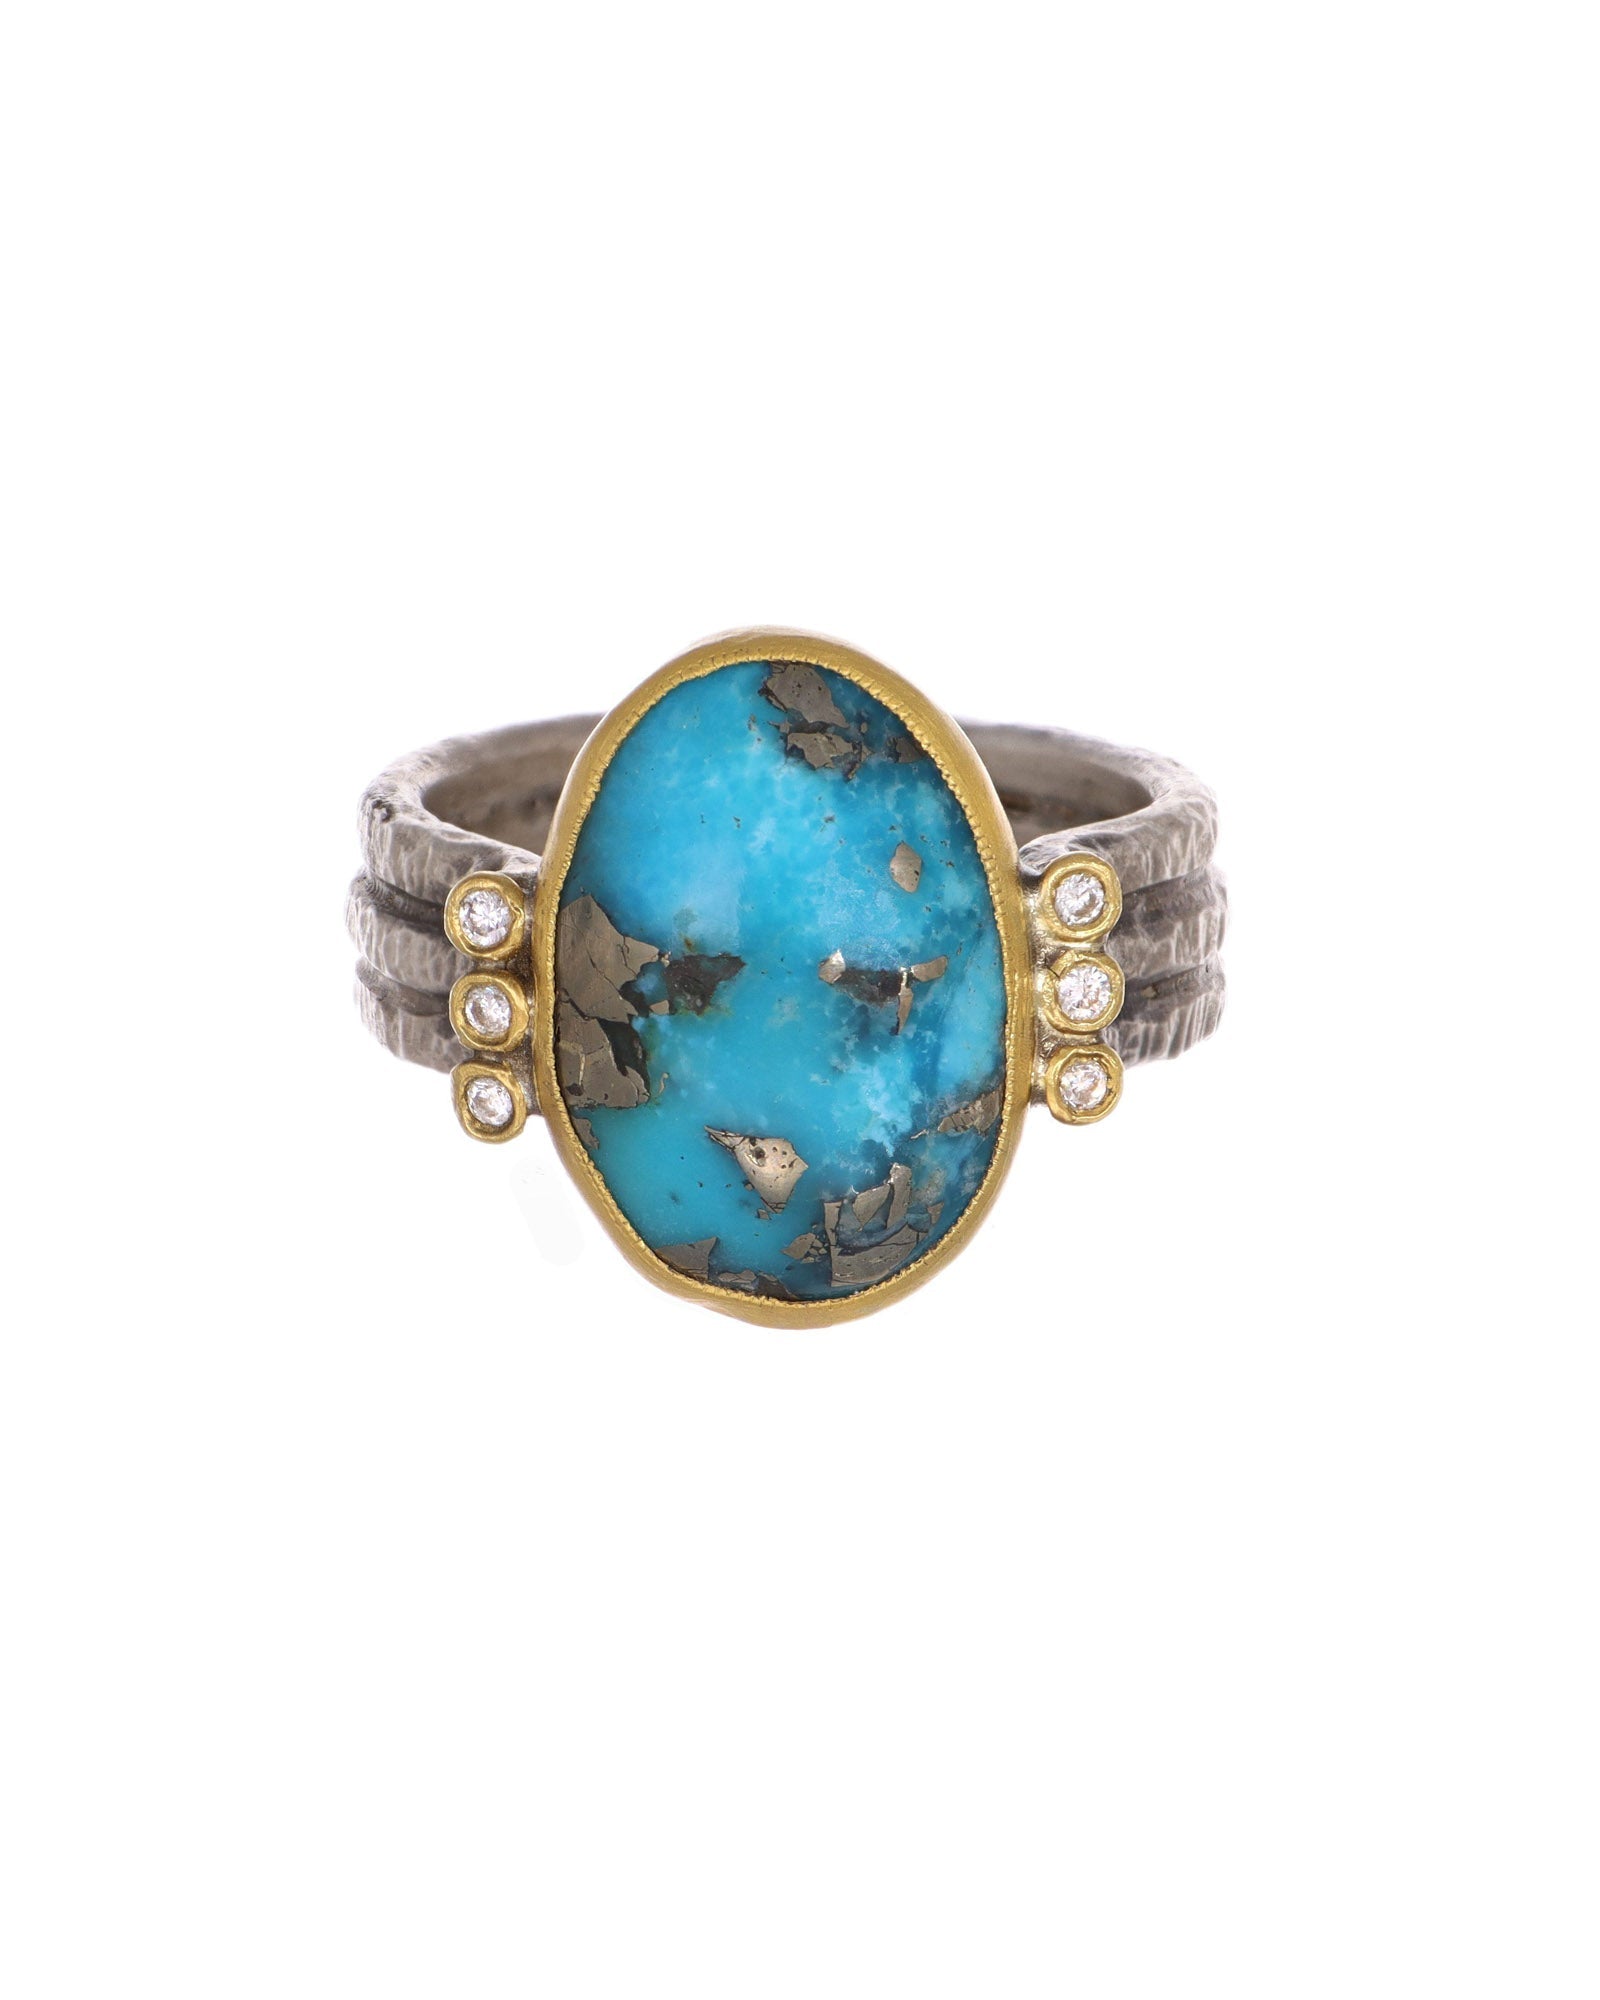 24k Gold and Turquoise Ring